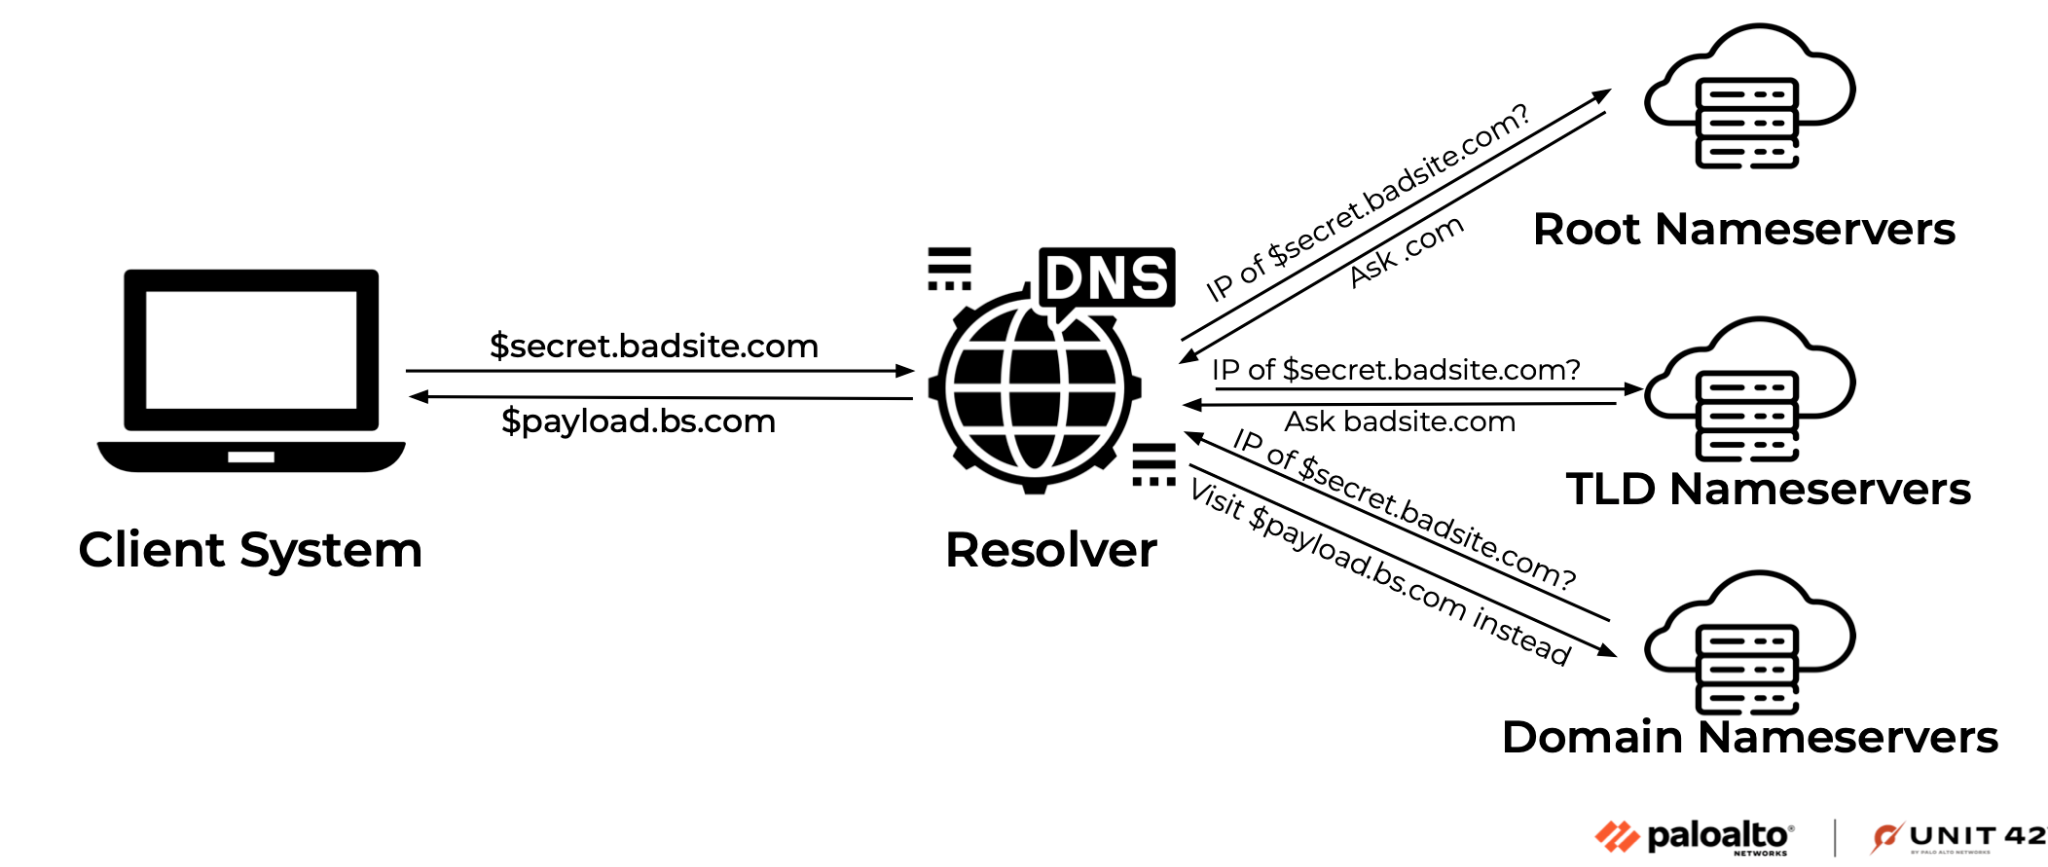 Image 1 is a diagram of DNS tunneling queries and responses. From the client system, the bad site and the payload of the bad site travel to the DNS resolver. From there the queries and responses are exchanged between the DNS resolver and the root nameservers, TLD nameservers, and the domain nameservers. 